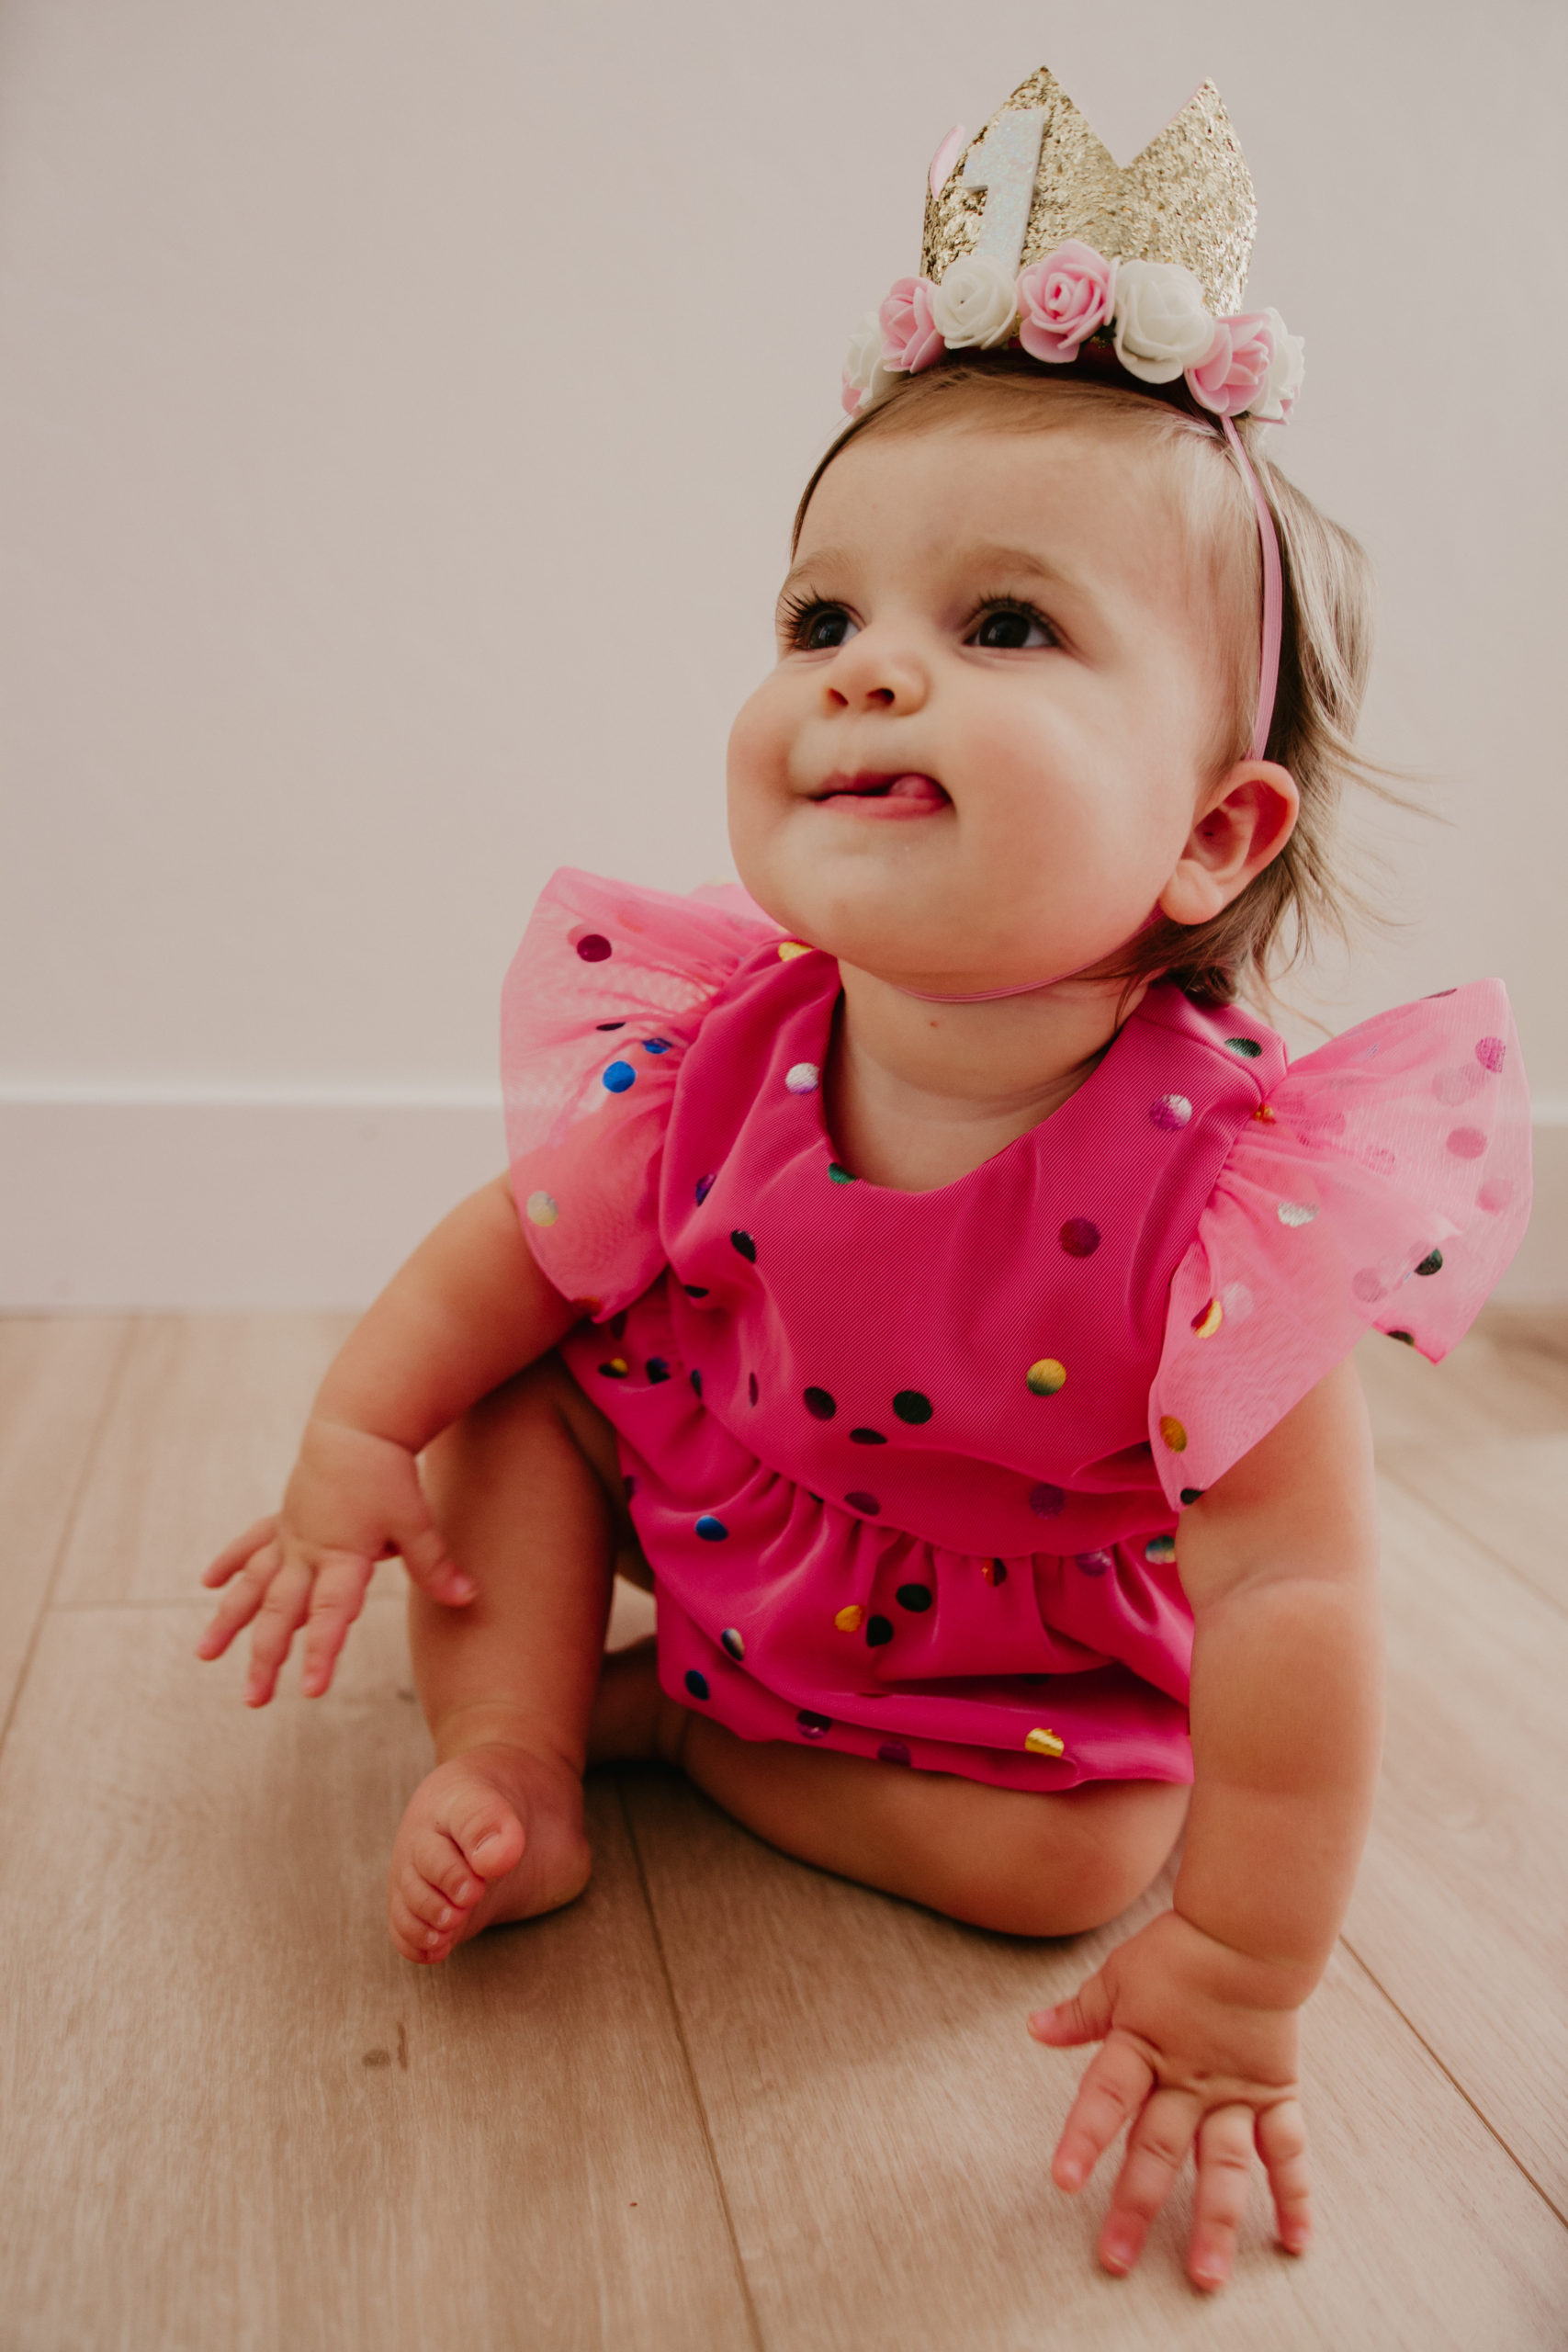 Cute 1st Birthday Girl Outfits - The Cuteness